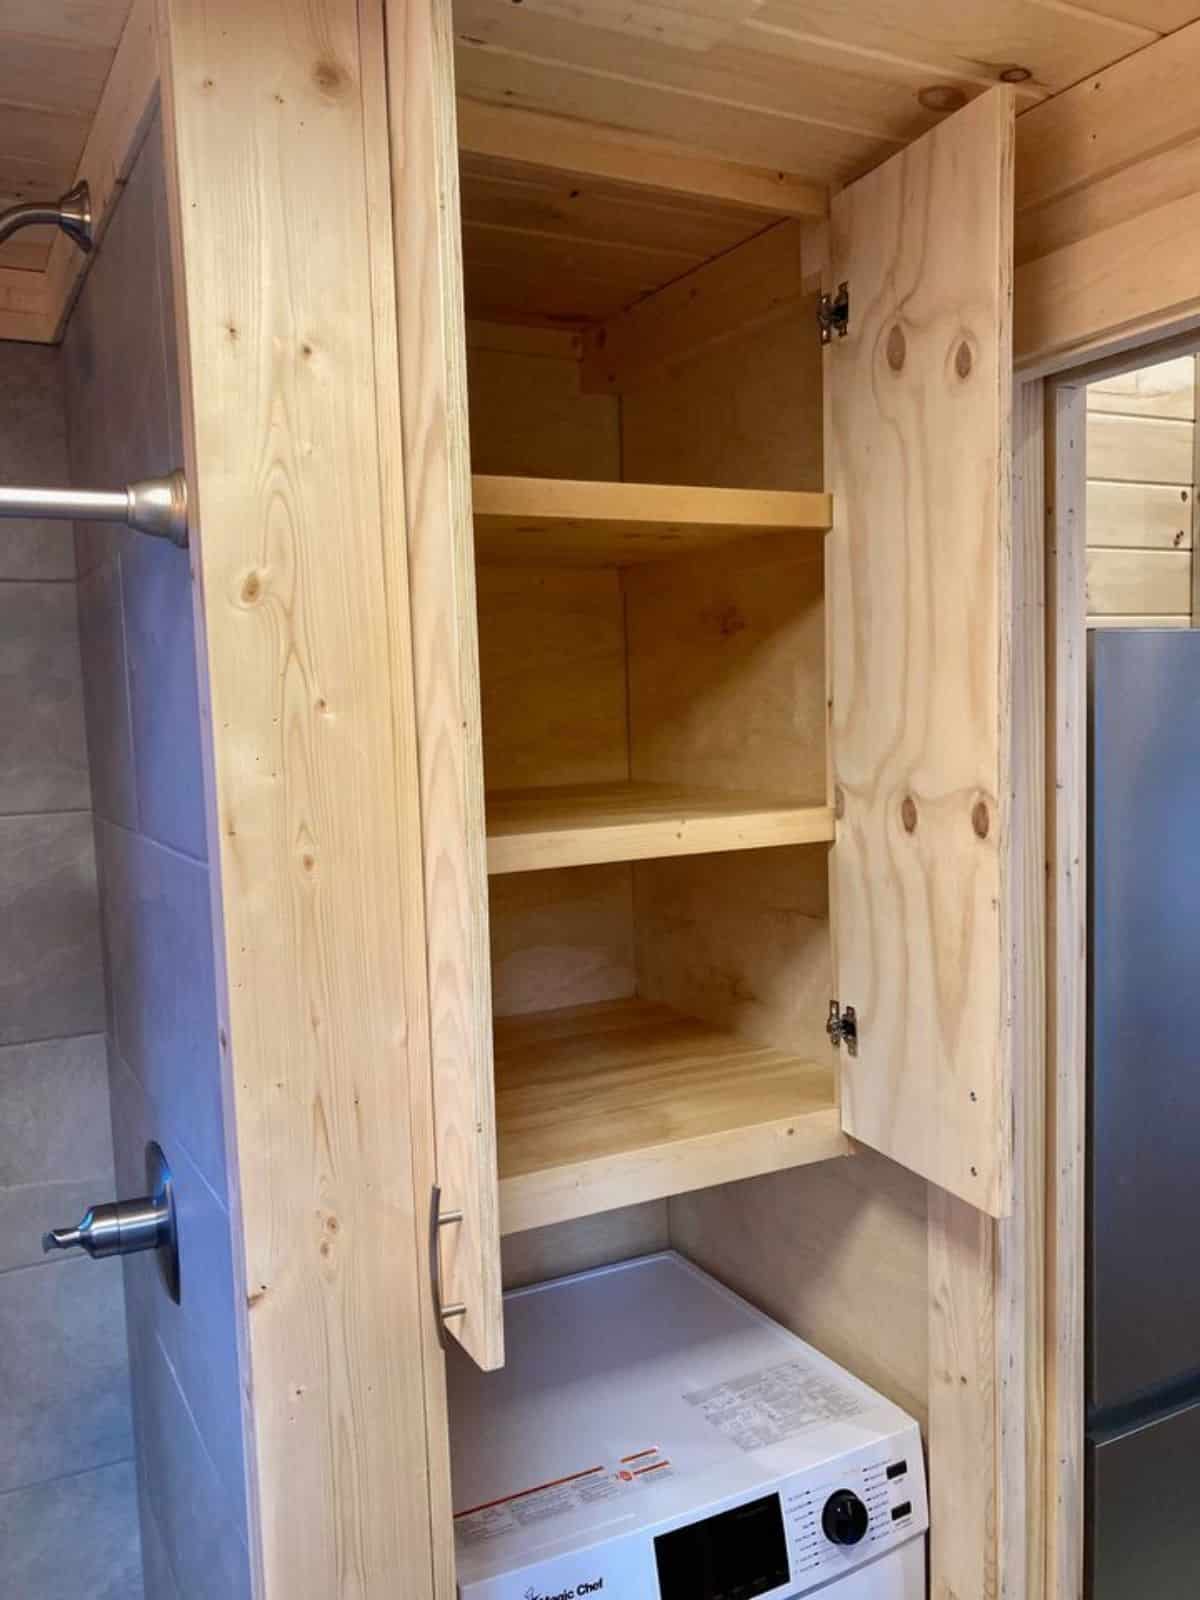 Storage cabinets in bathroom of 28’ Tiny Home